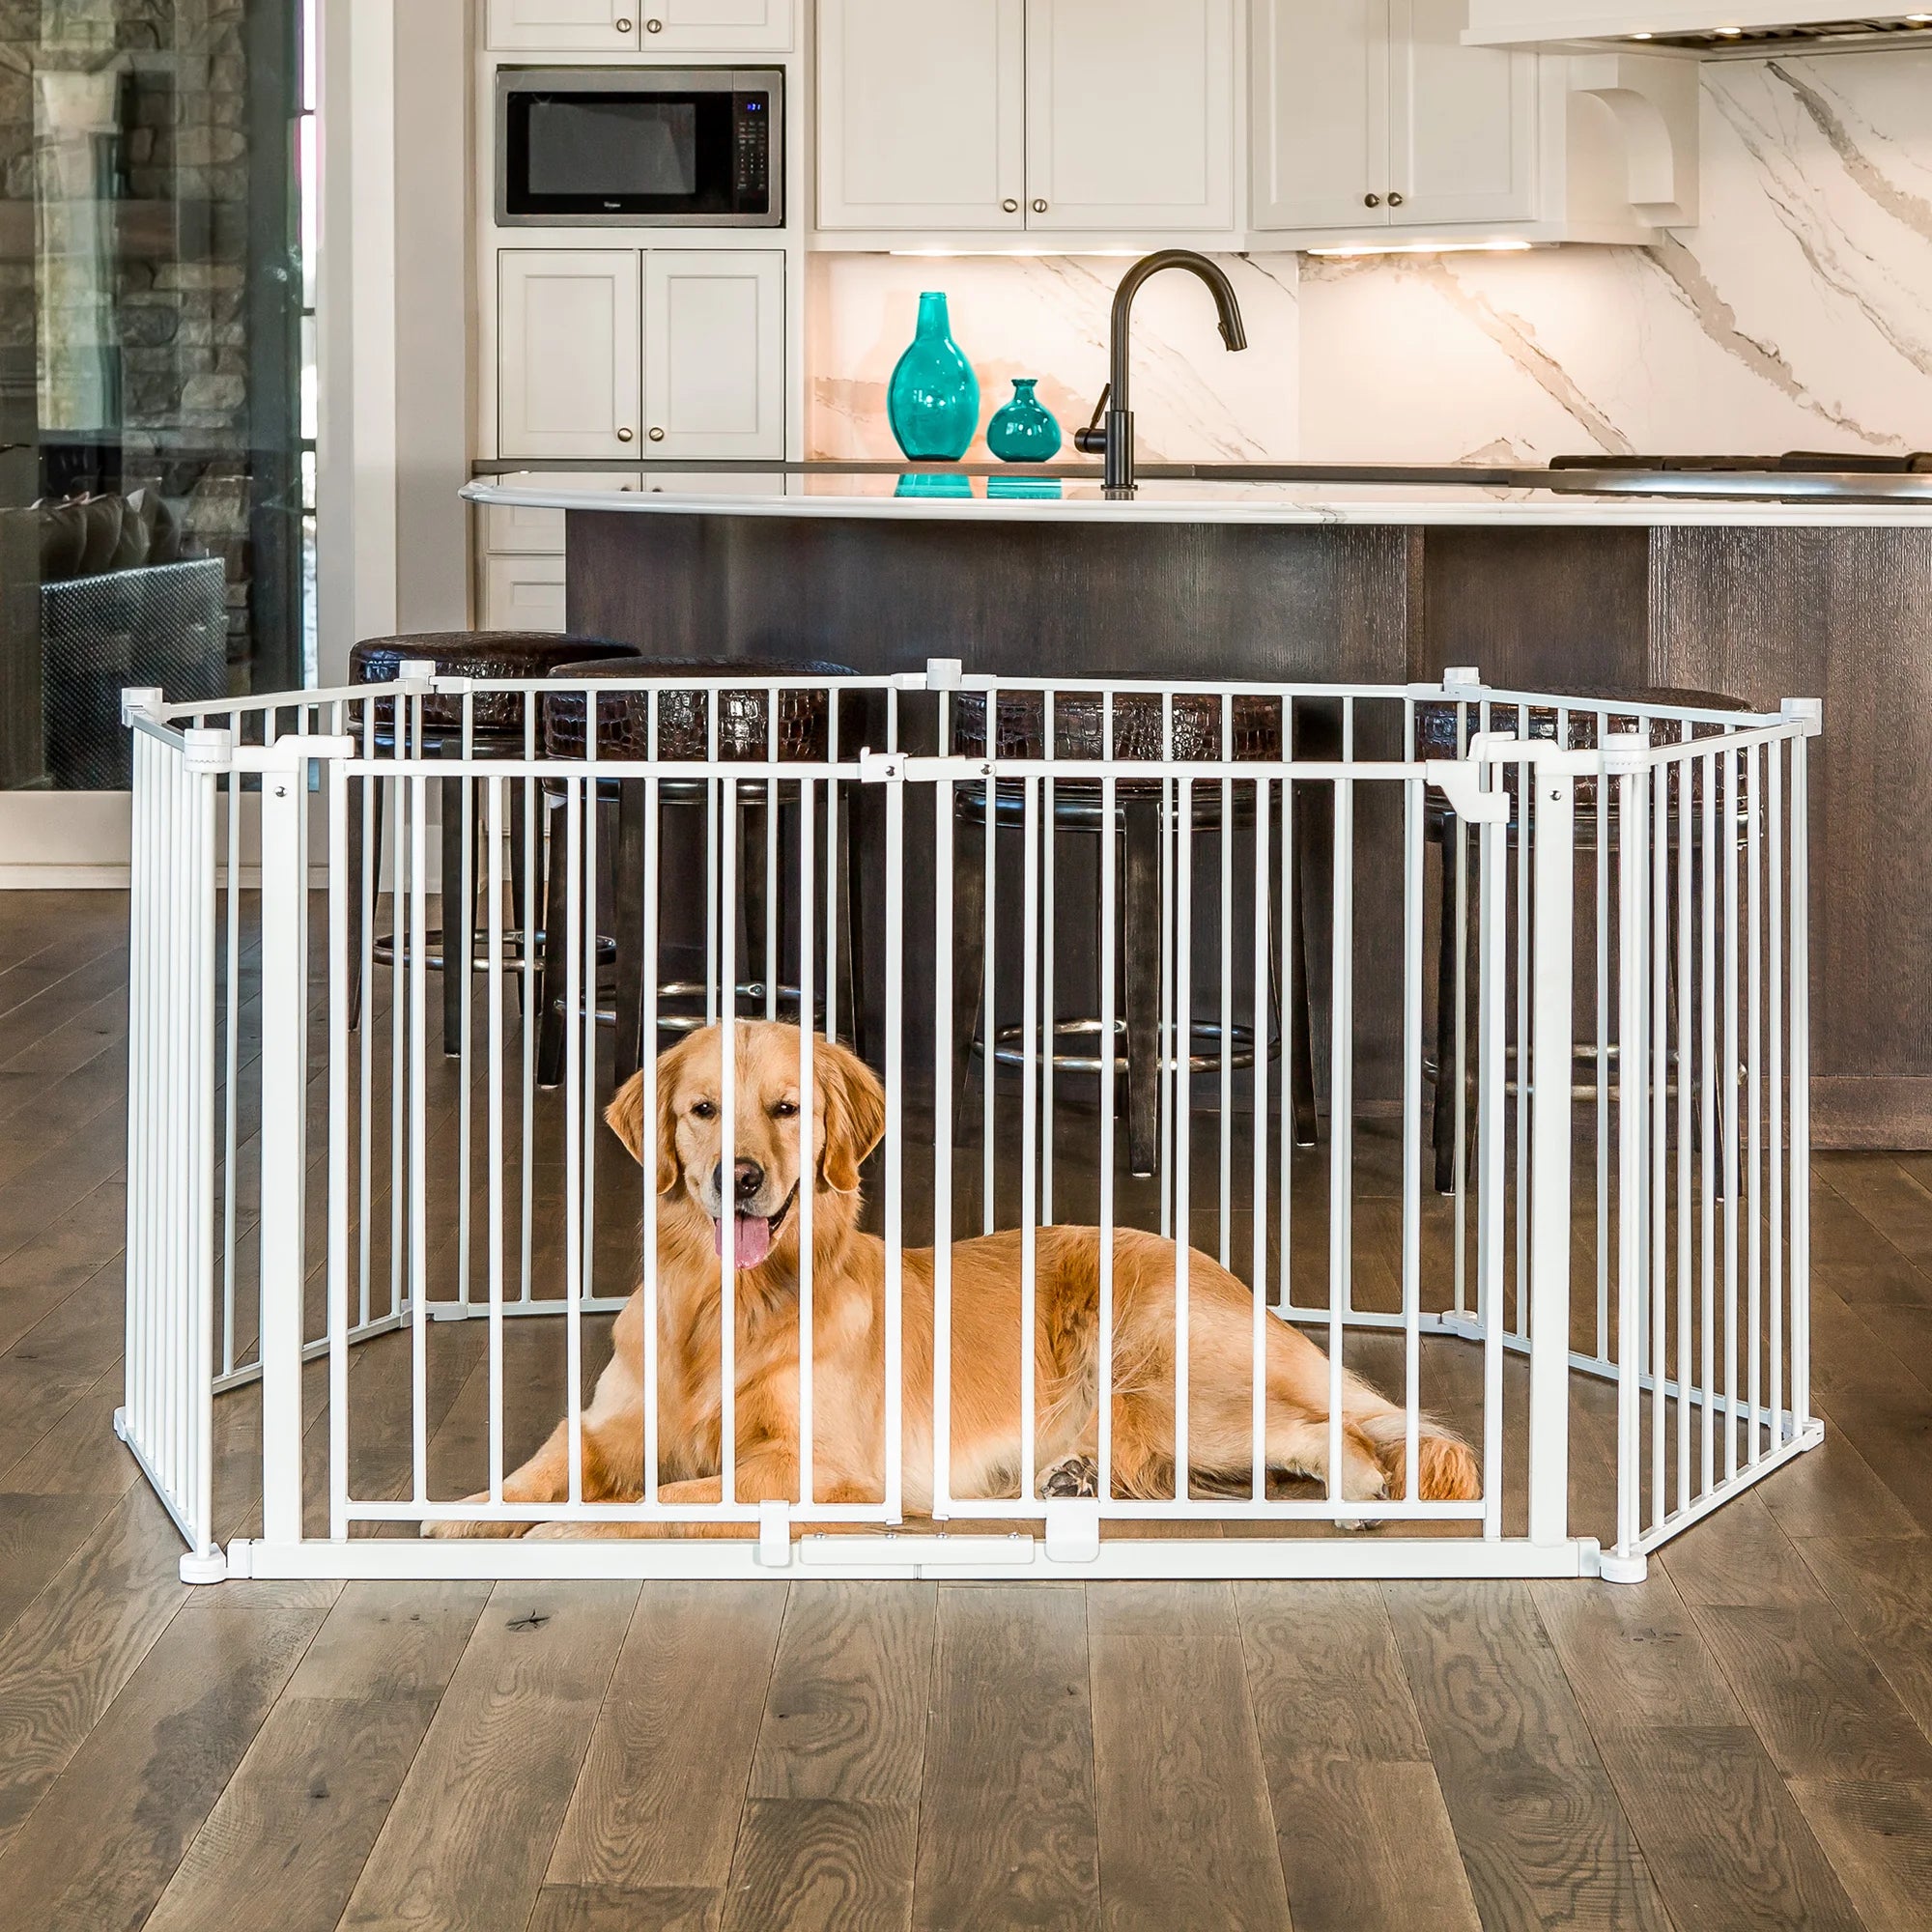 A dog sitting inside of the Double Door Super Wide Pet Gate and Pet Yard while being in a kitchen.